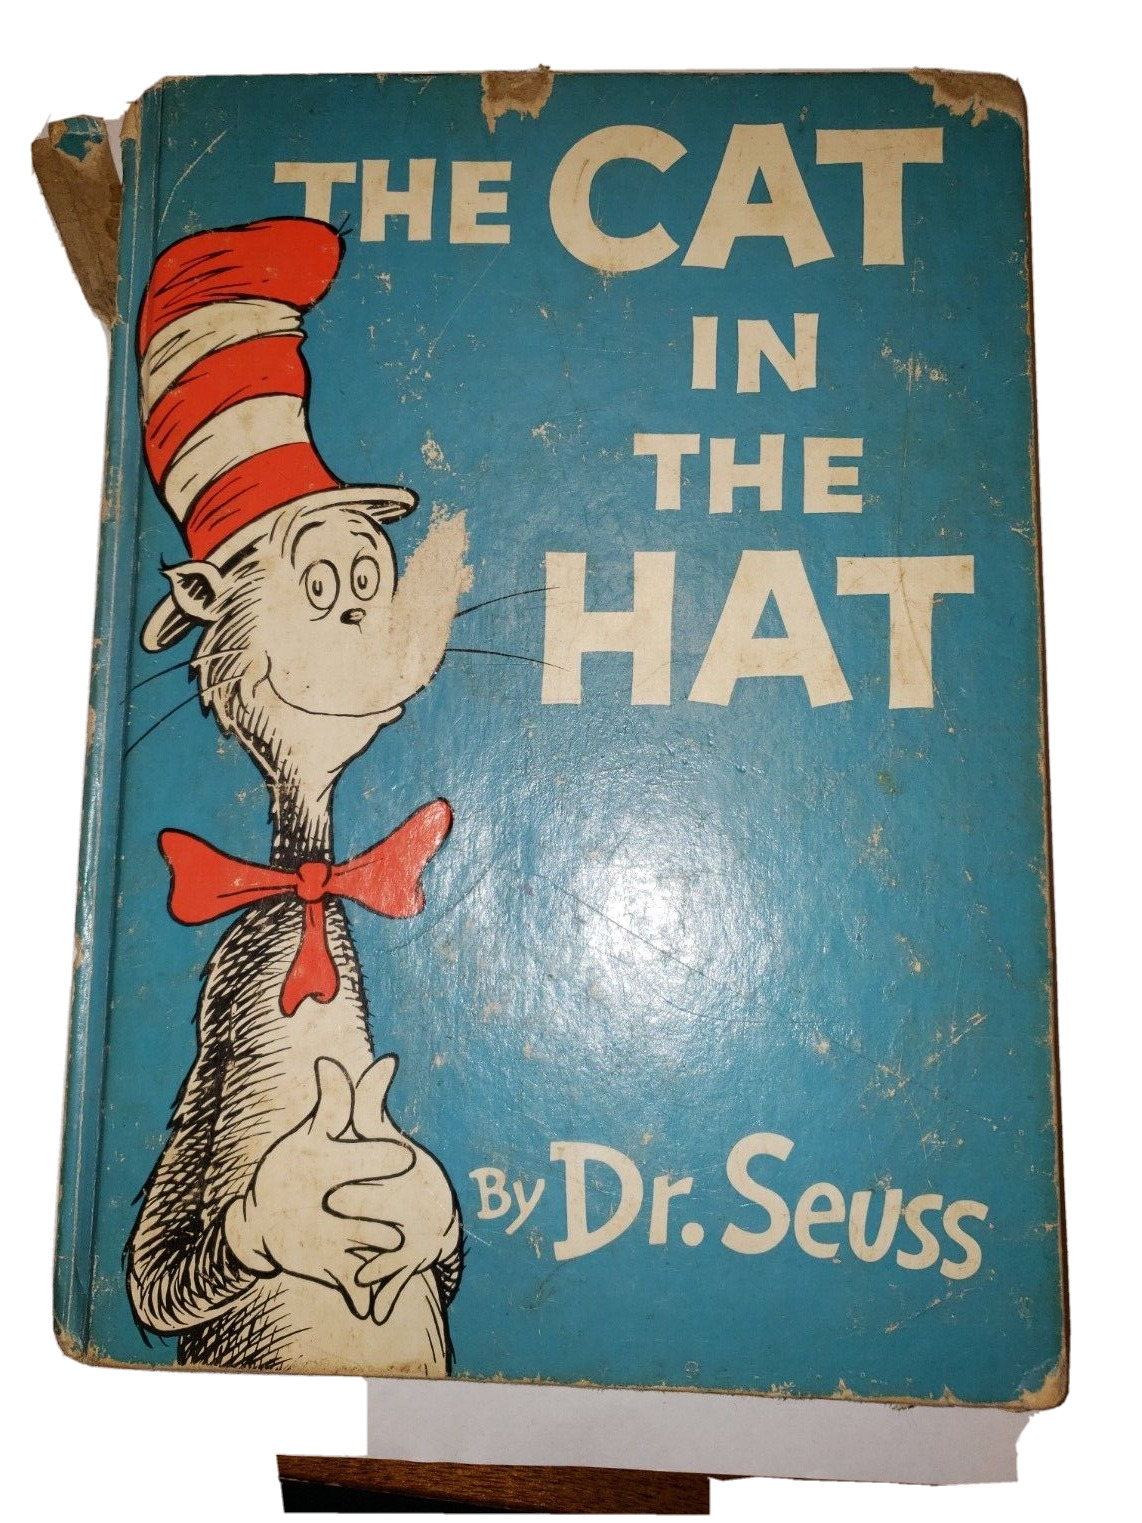 THE CAT IN THE HAT rare 1957 edition Dr Seuss Original